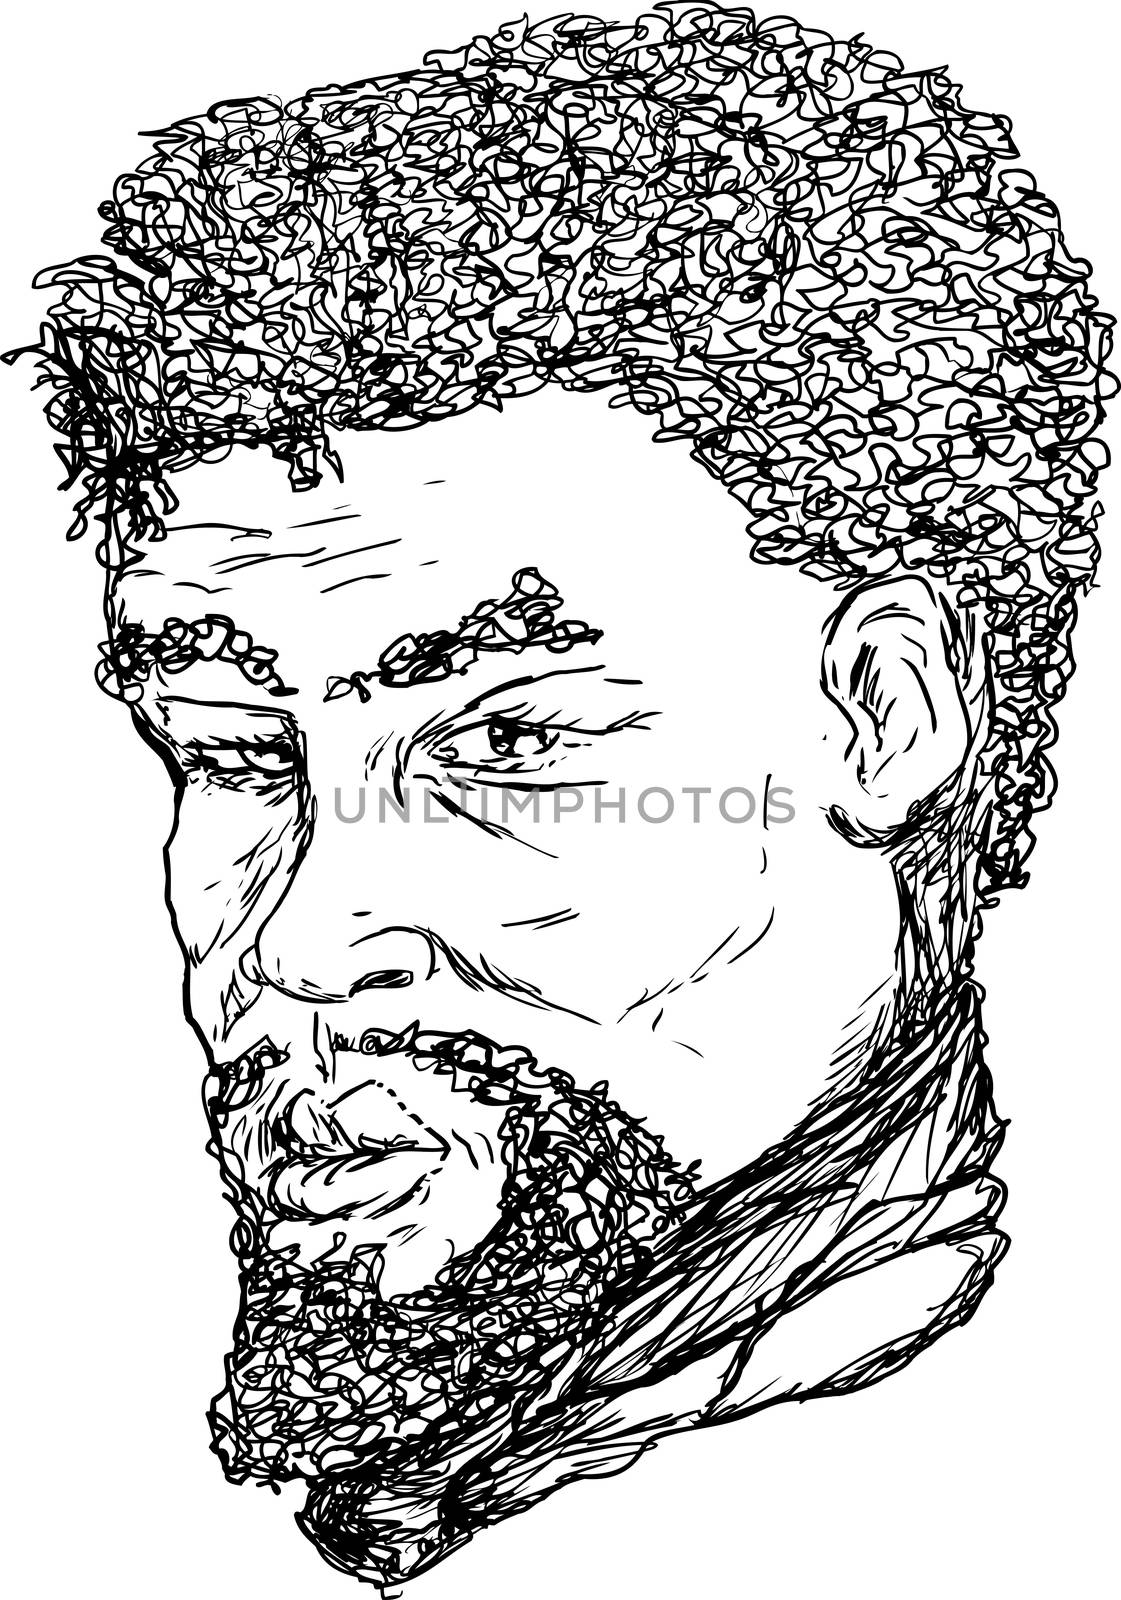 Outlined ink portrait of 18th century African man